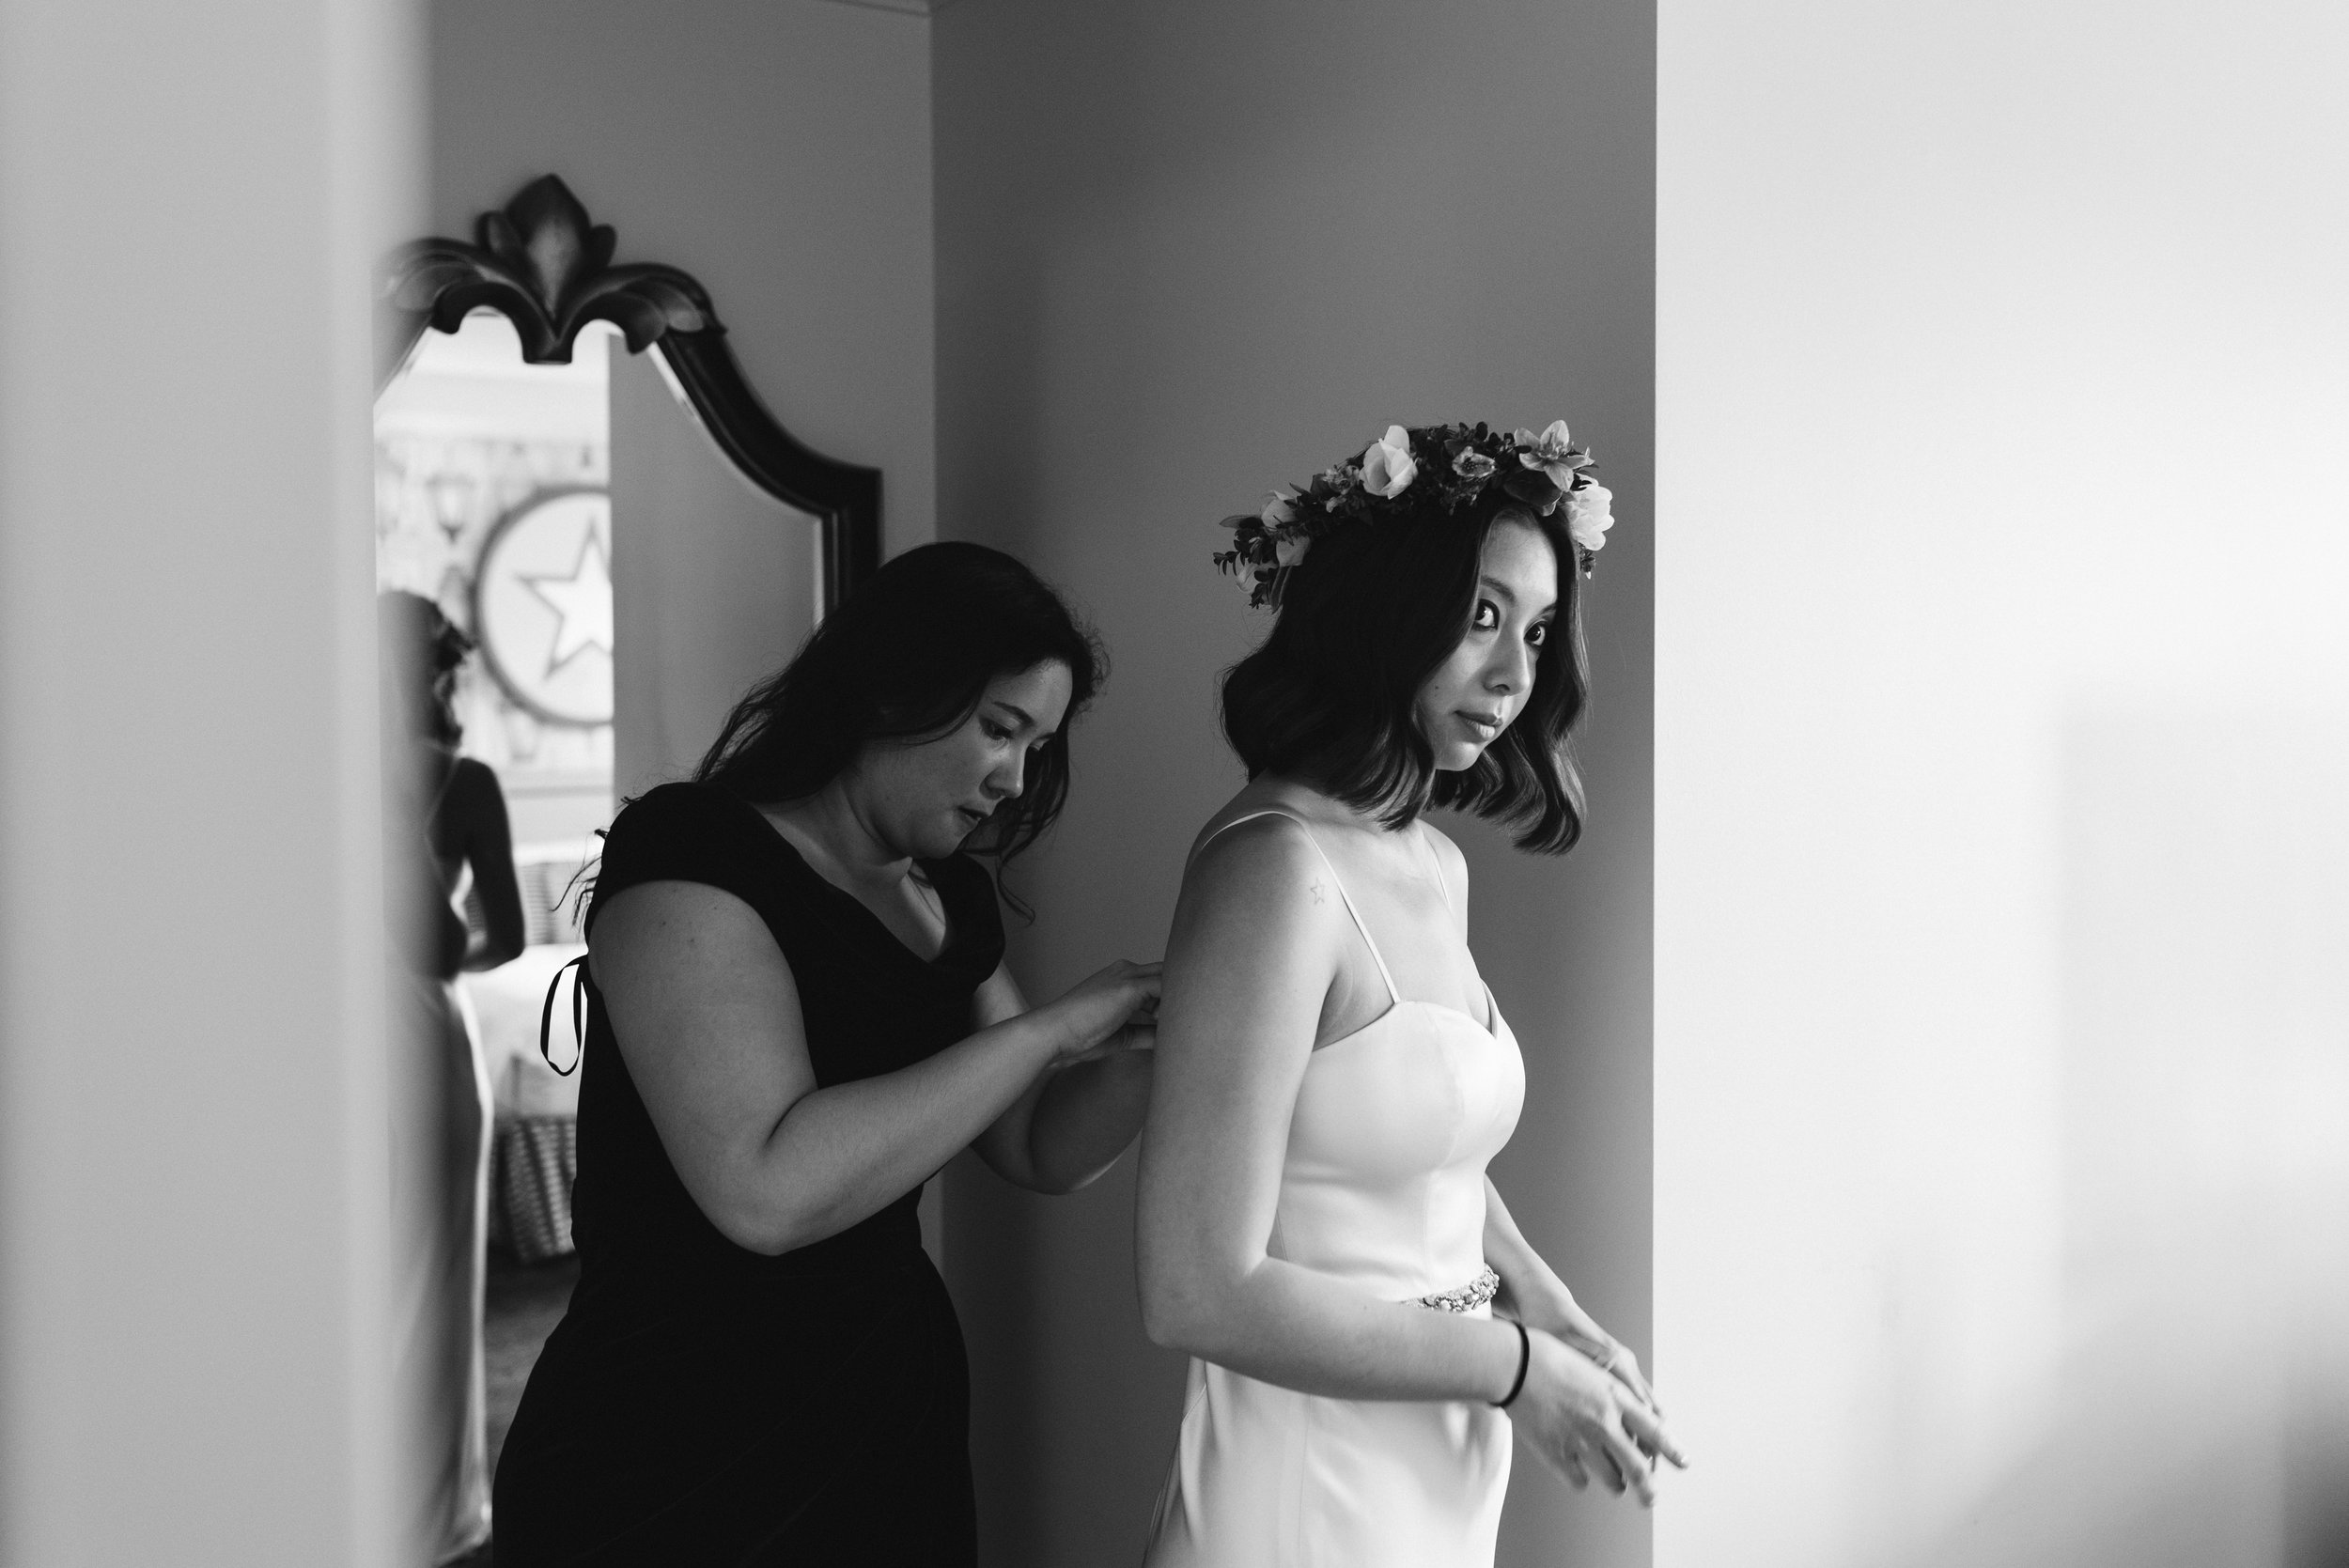  Washington DC, Baltimore Wedding Photographer, Alexandria, Old Town, Jewel Tone, Romantic, Modern, The Alexandrian Autograph Collection Hotel, Black and white photo, Bridesmaid helping Bride get ready, Flower Crown 